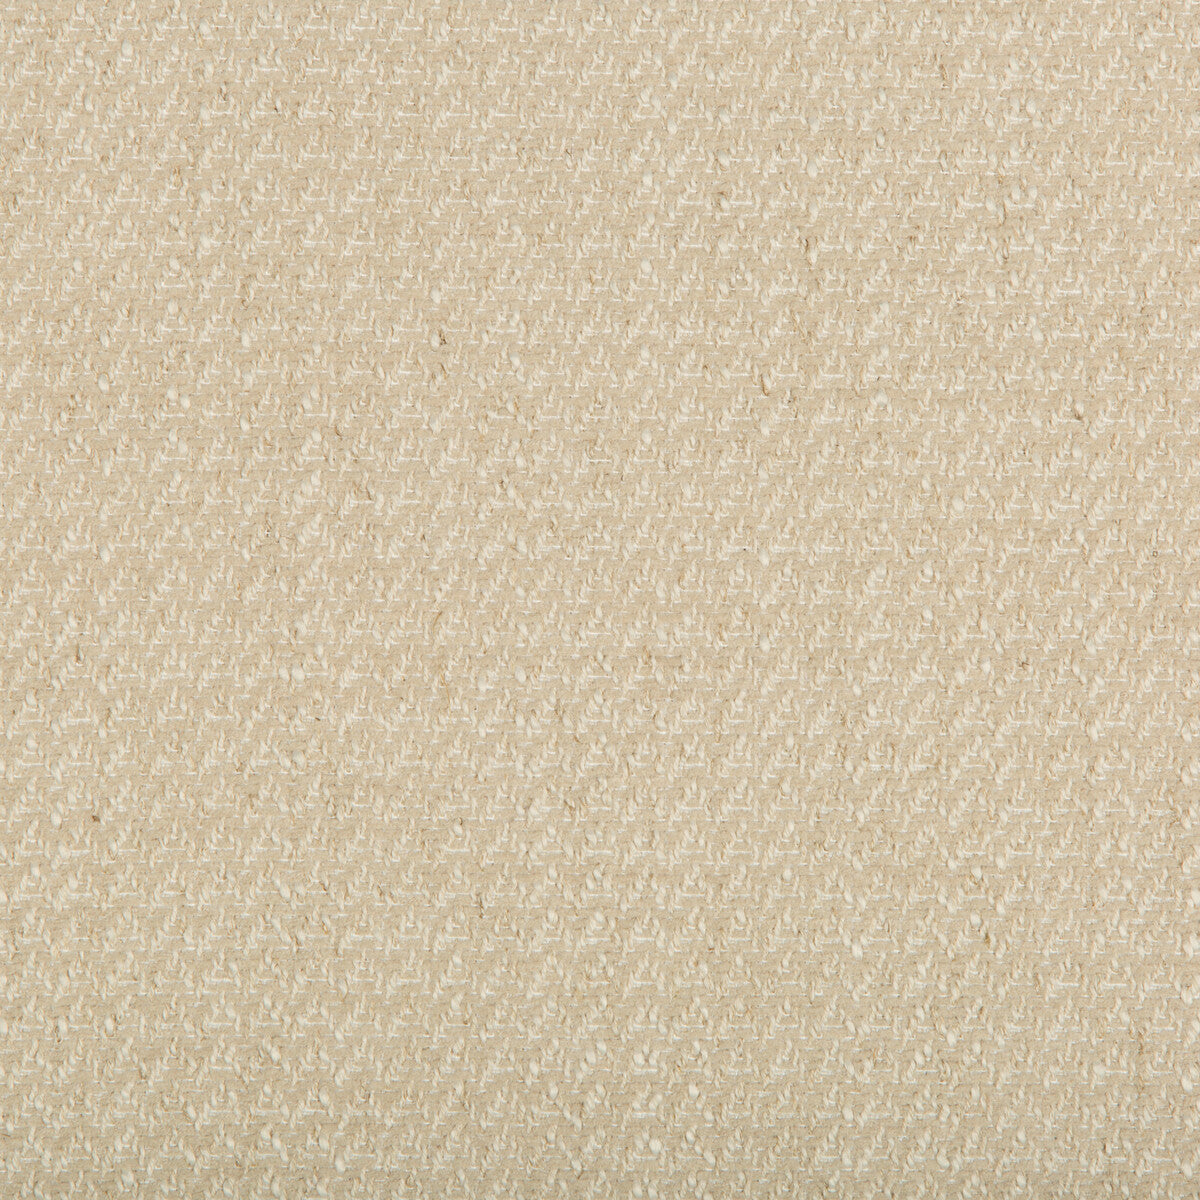 Kravet Contract fabric in 35408-16 color - pattern 35408.16.0 - by Kravet Contract in the Crypton Incase collection